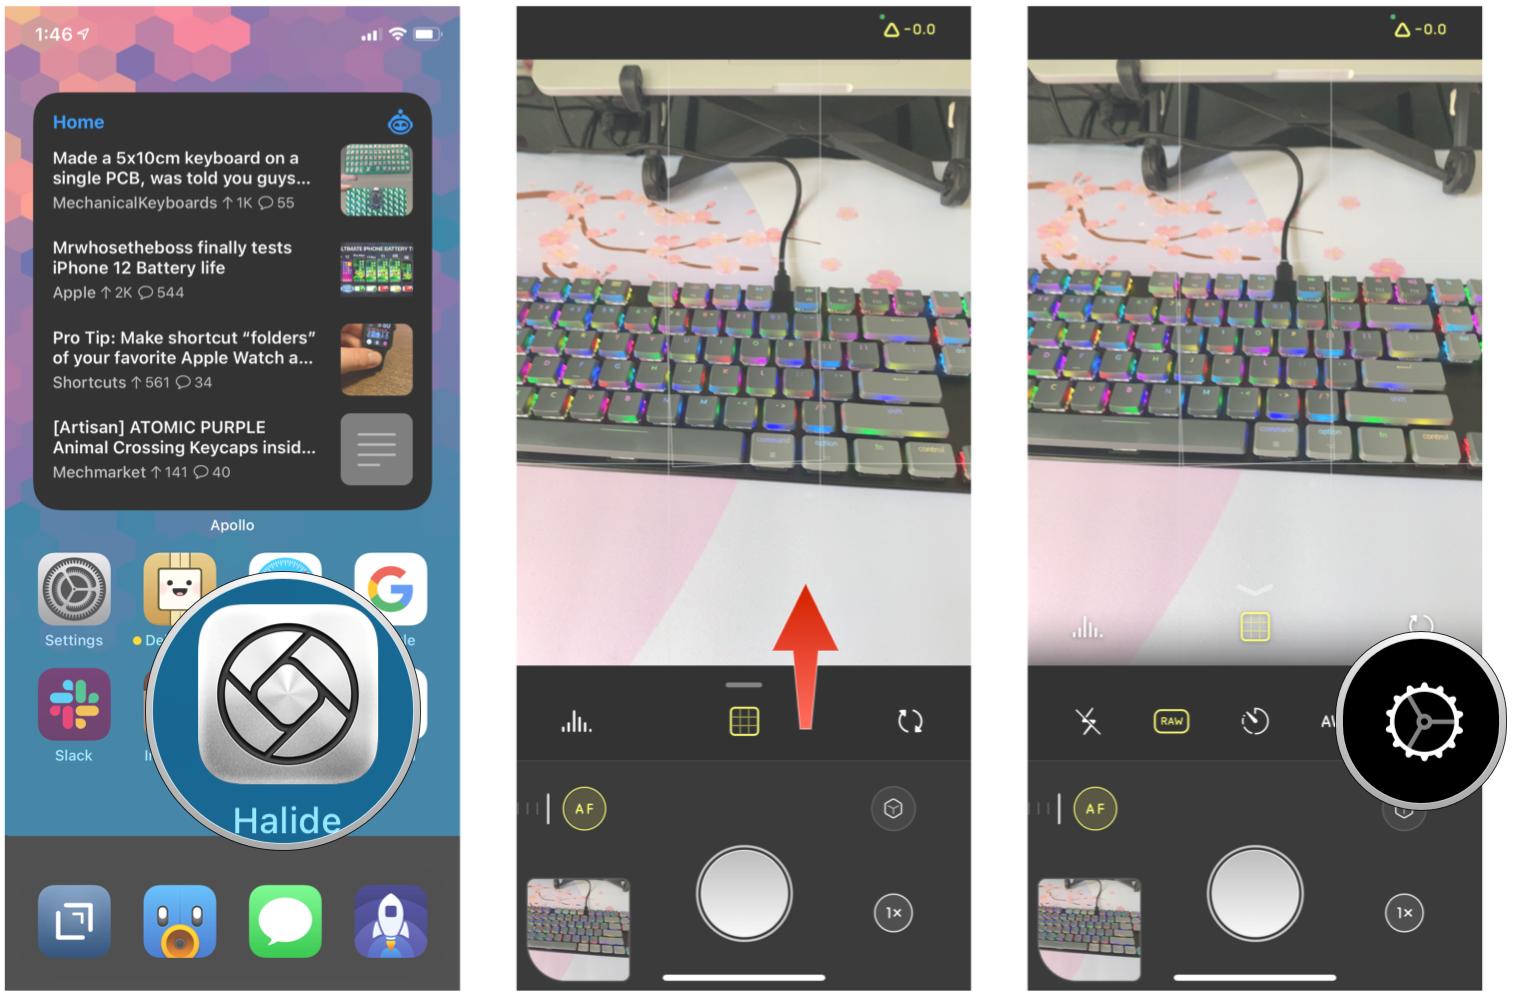 How to shoot RAW images on your iPhone or iPad by showing: Launch Halide, swipe up on the control panel, tap Settings